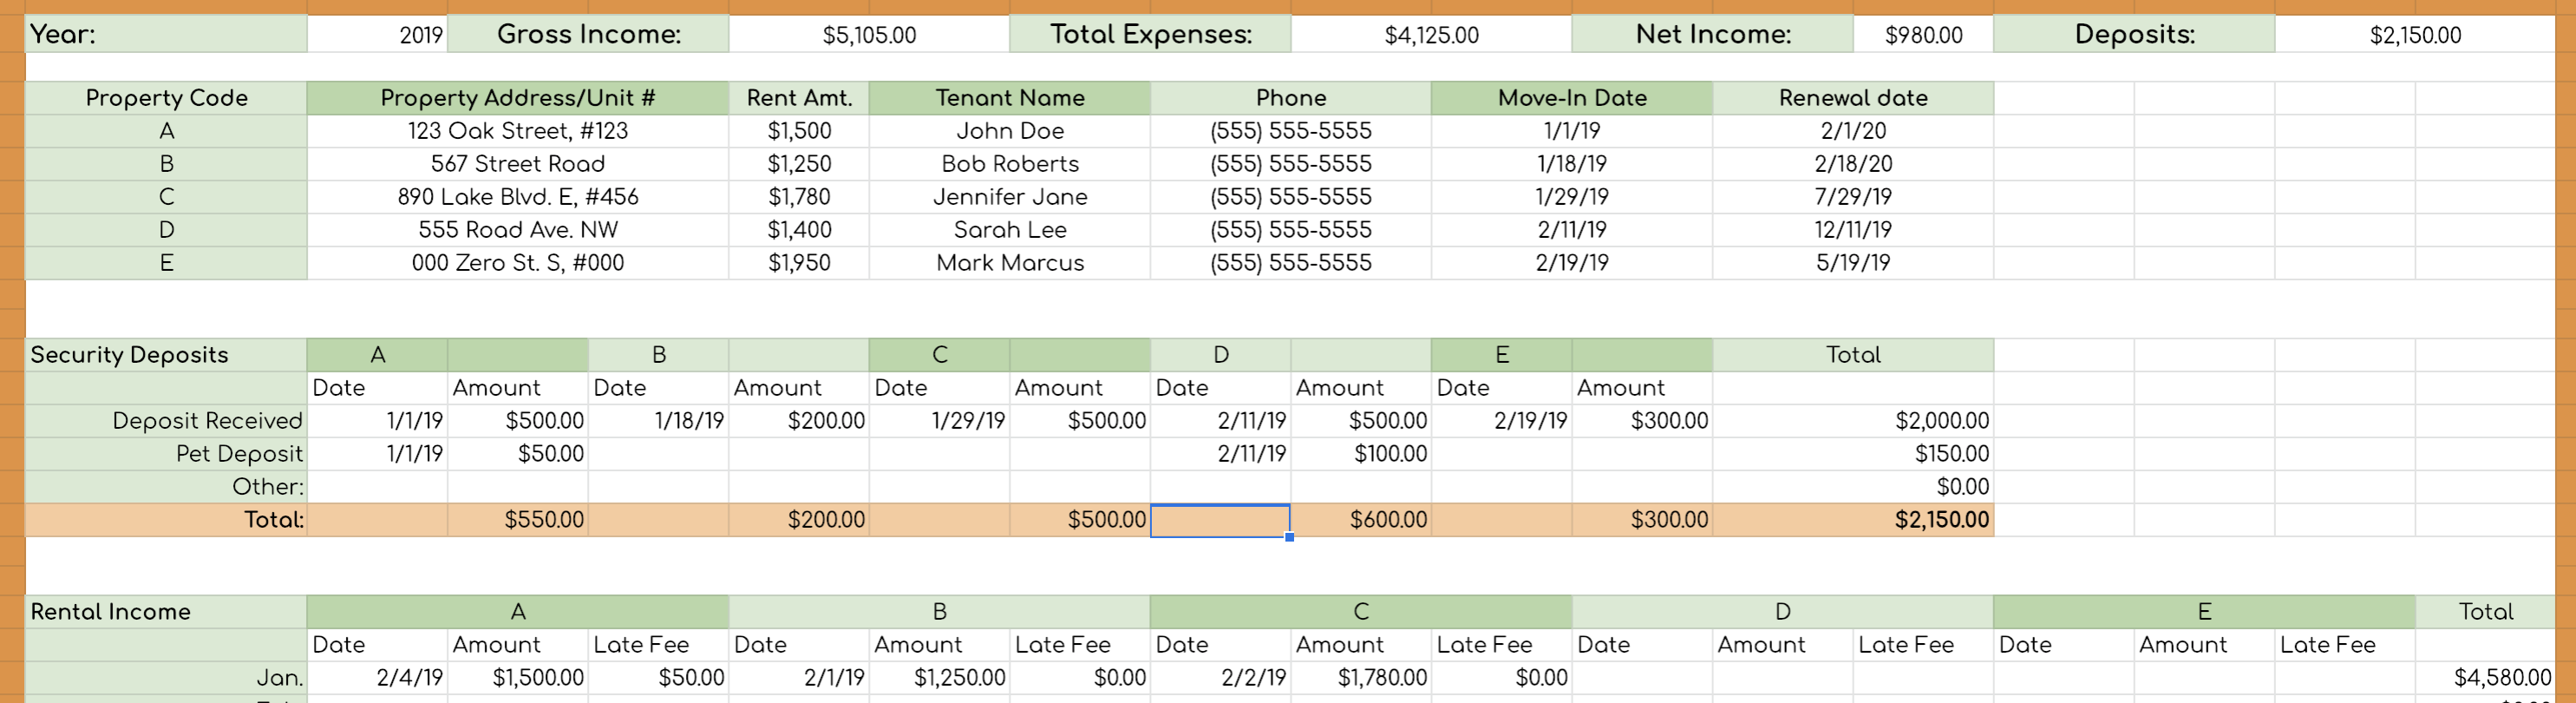 Rental Income and Expense Worksheet - PropertyManagement Within Property Management Budget Template